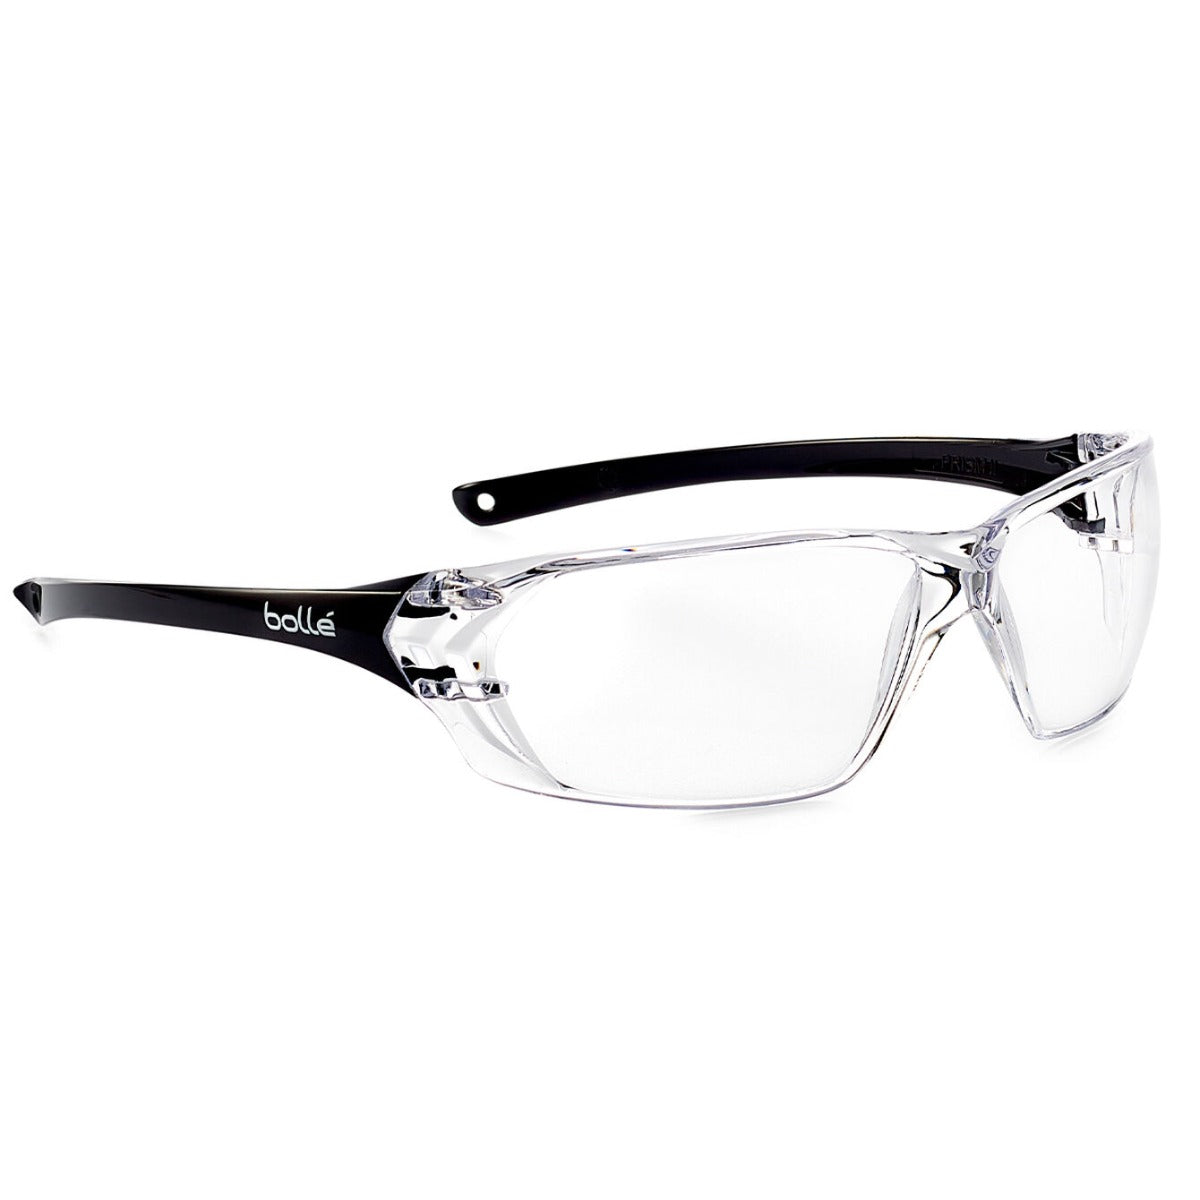 Boll?? Prism 2 Rimless Clear Safety Glasses (40057)